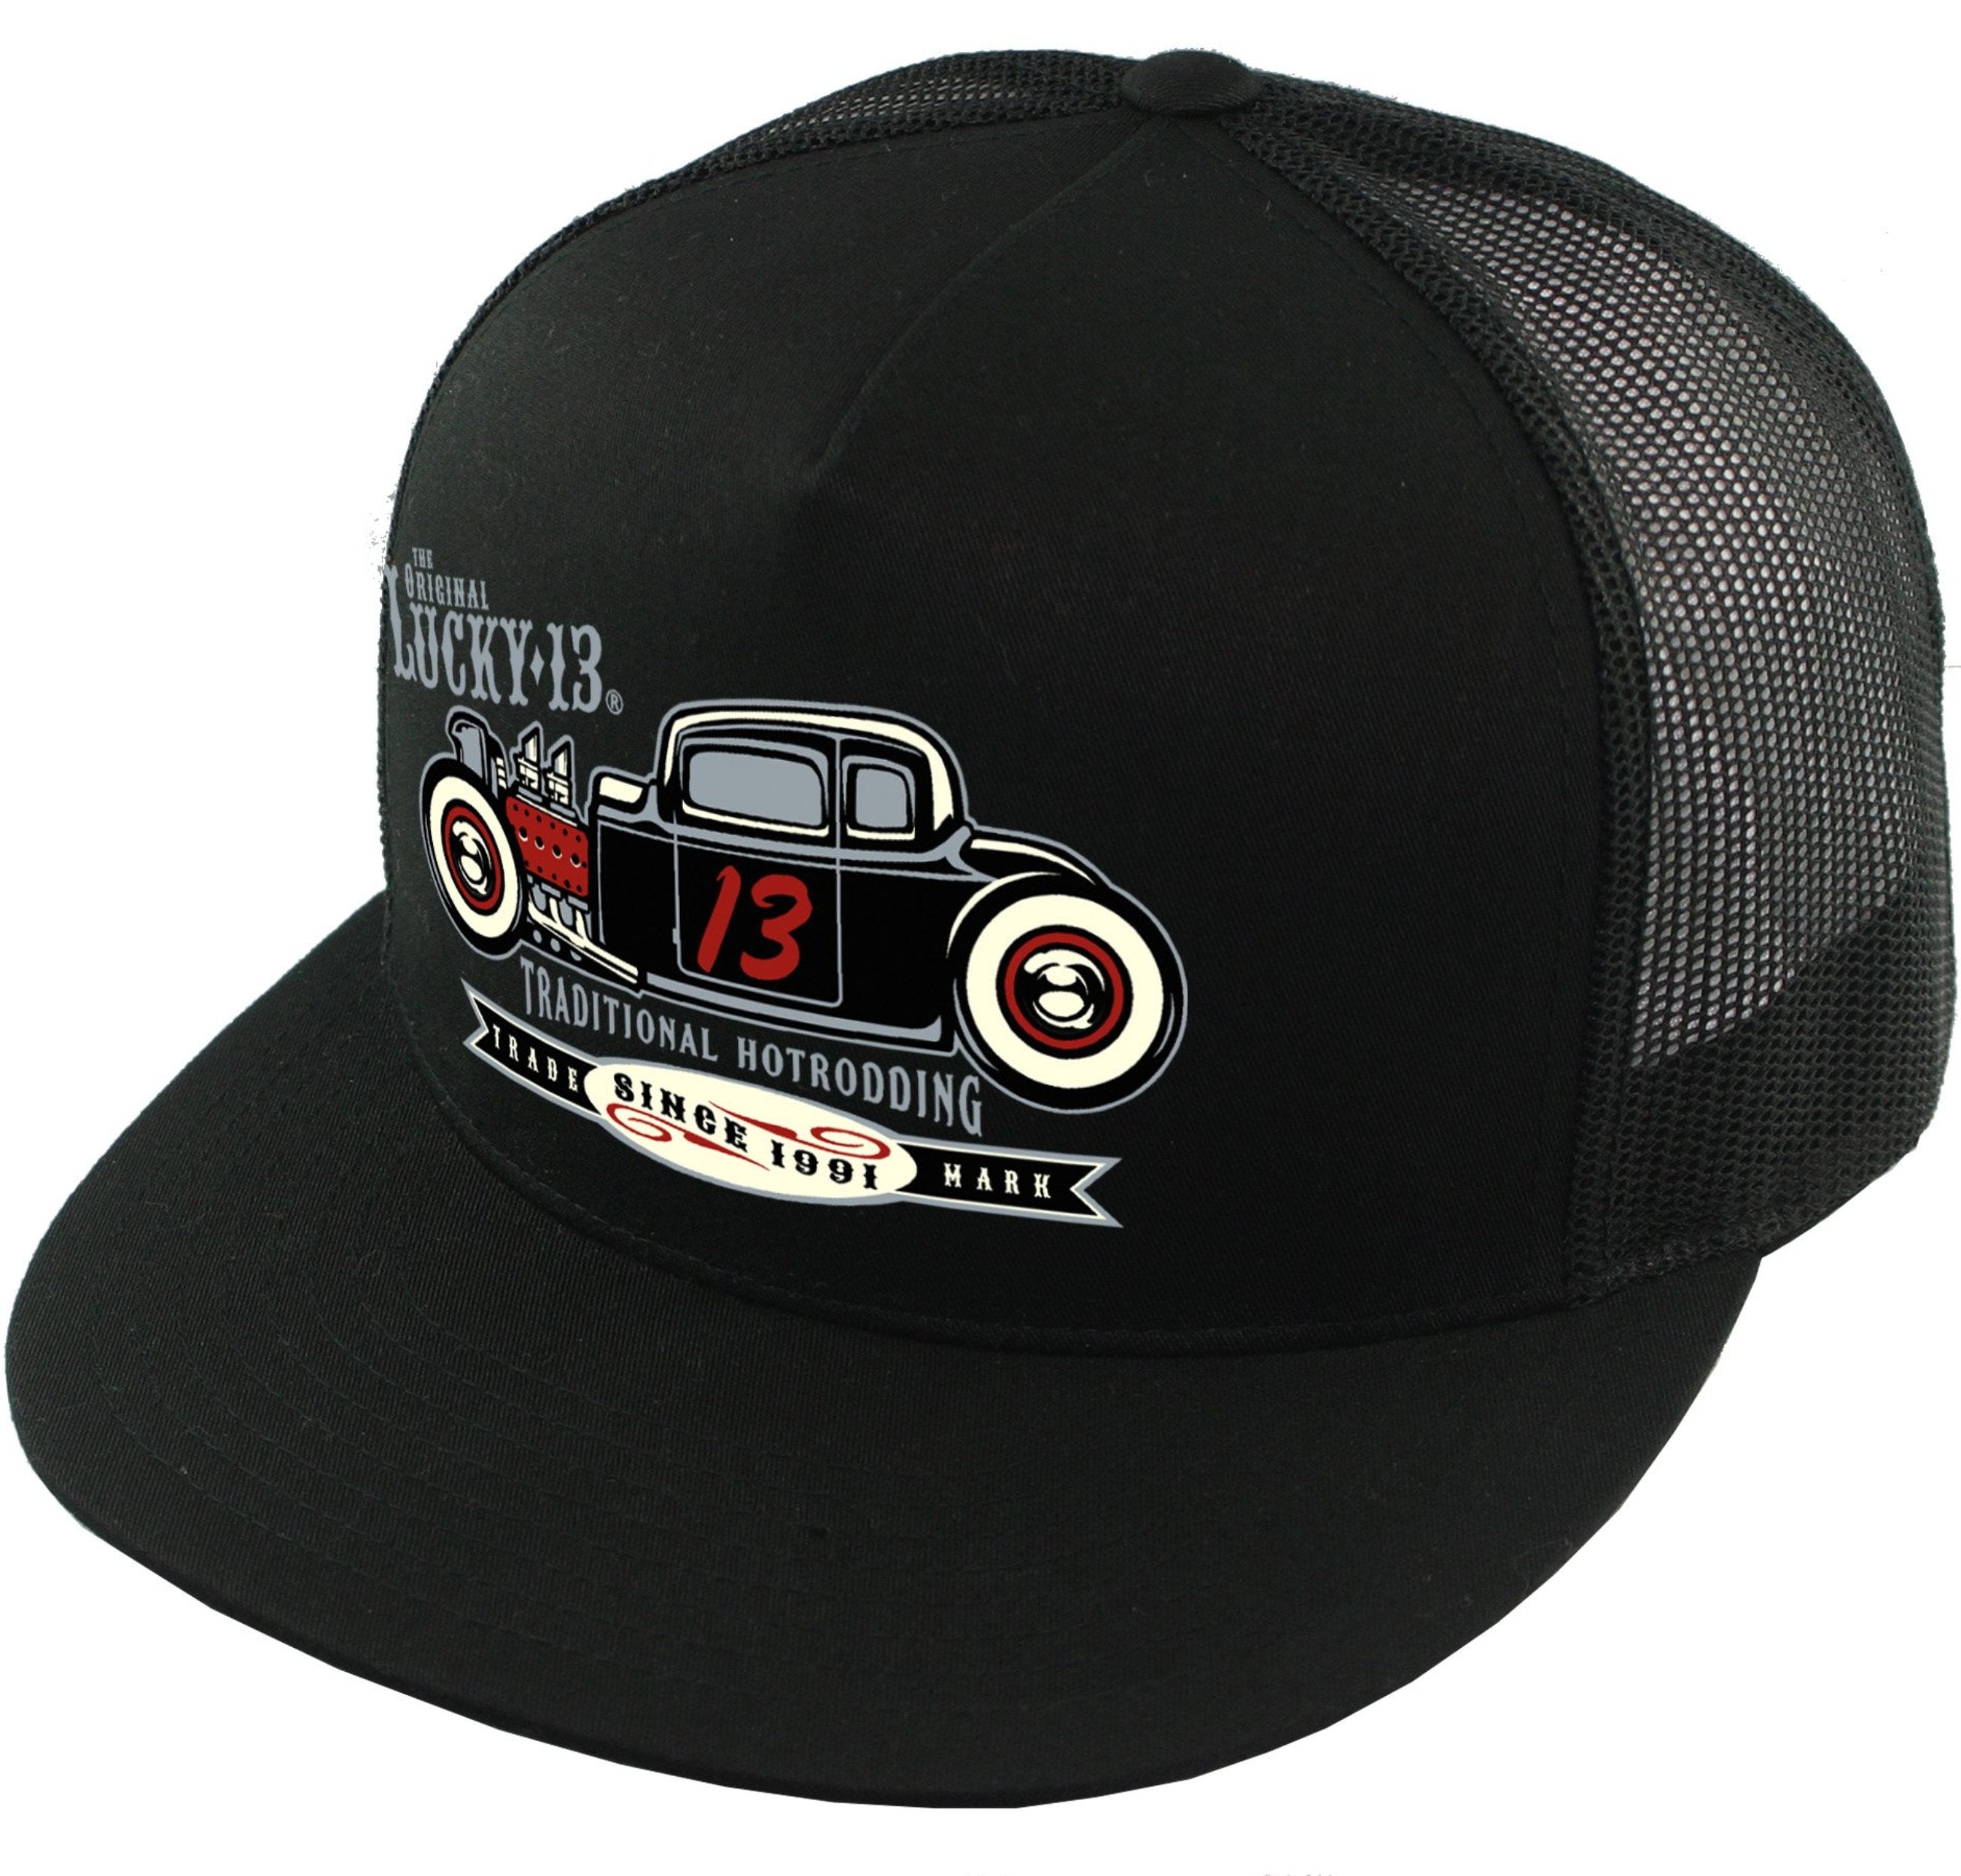 The COUPE 13 Trucker Cap